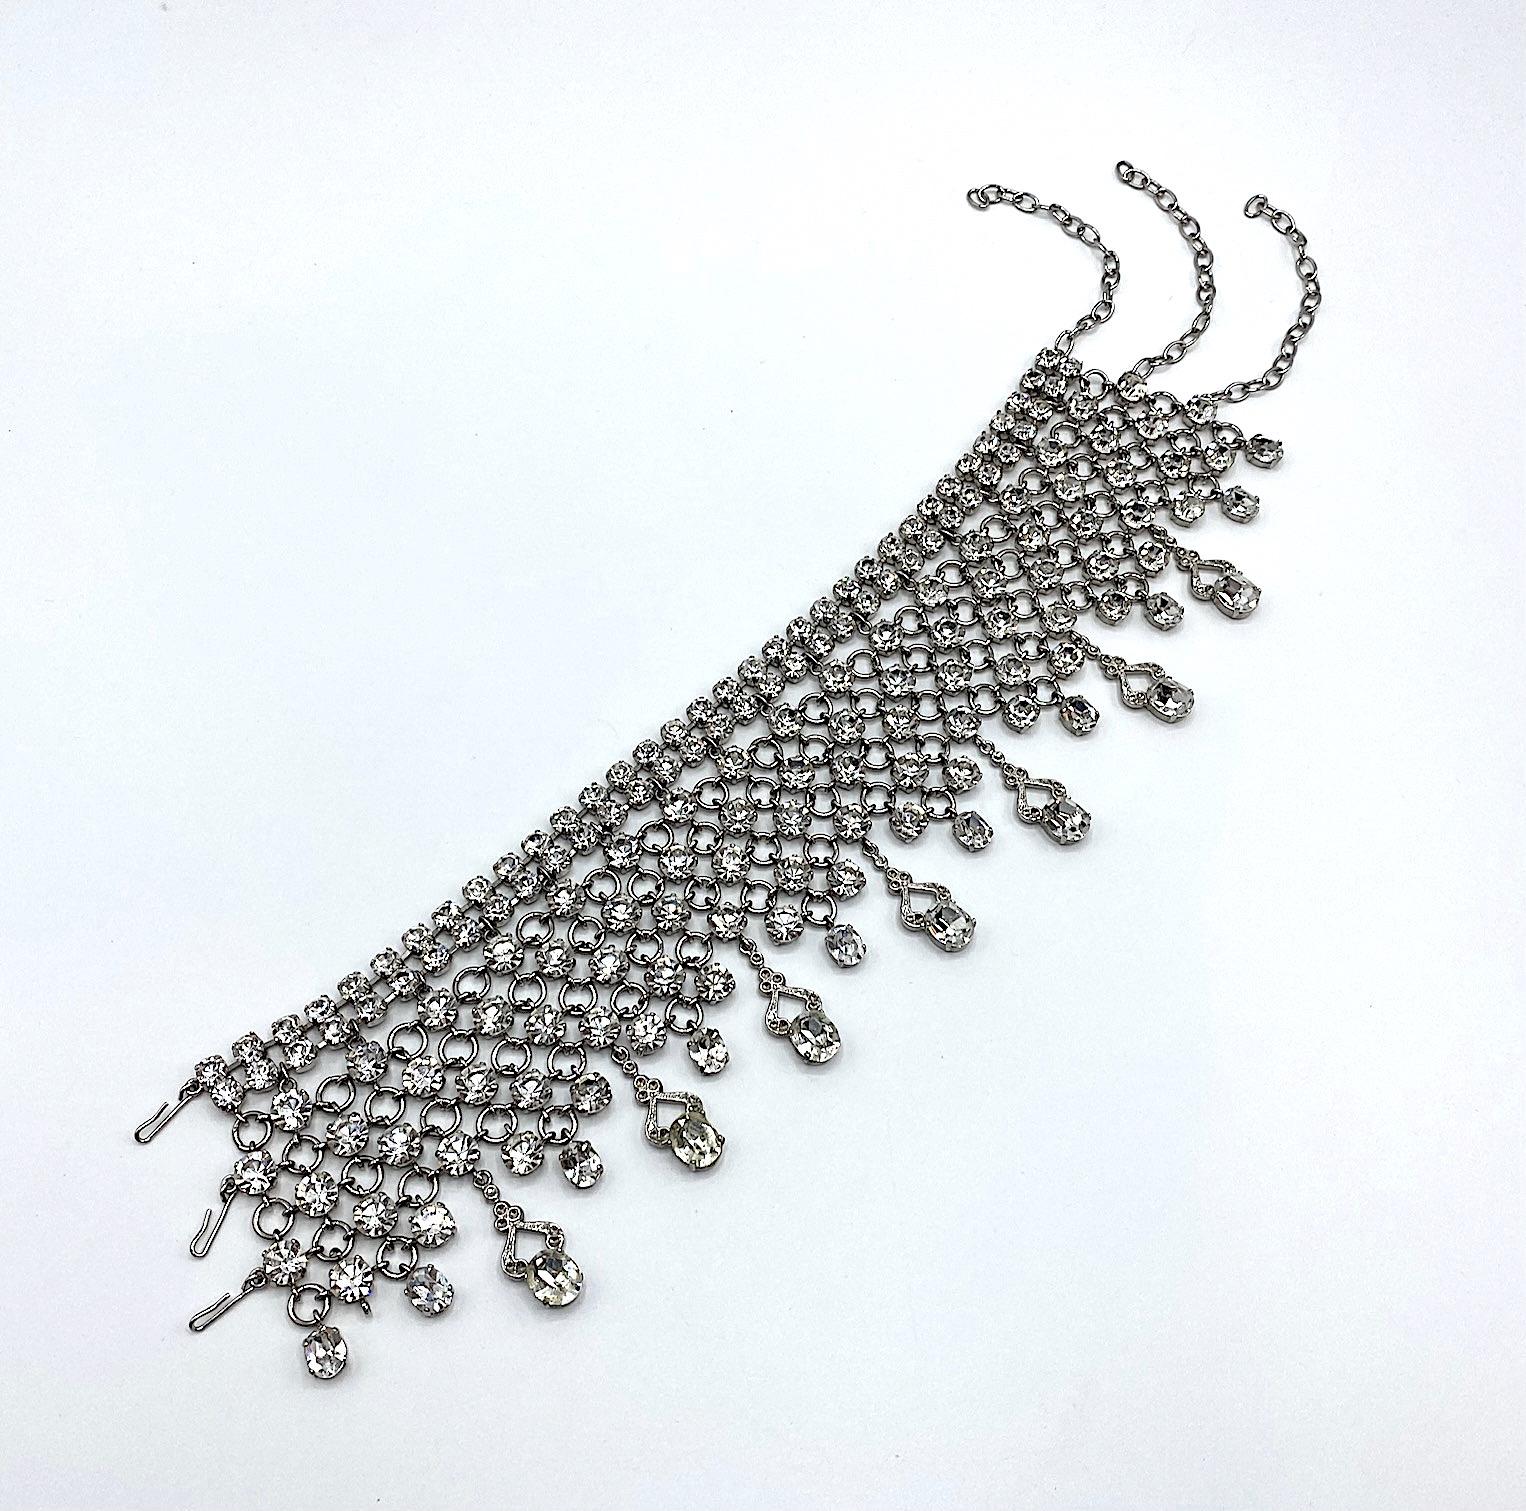 A true dog collar style necklace by Italian fashion jewelry company Bozart. The Milan based company has been producing bijoux, bags and fshion accessories since opening in 1956. This necklace is chocker style meant to be worn closely around the neck